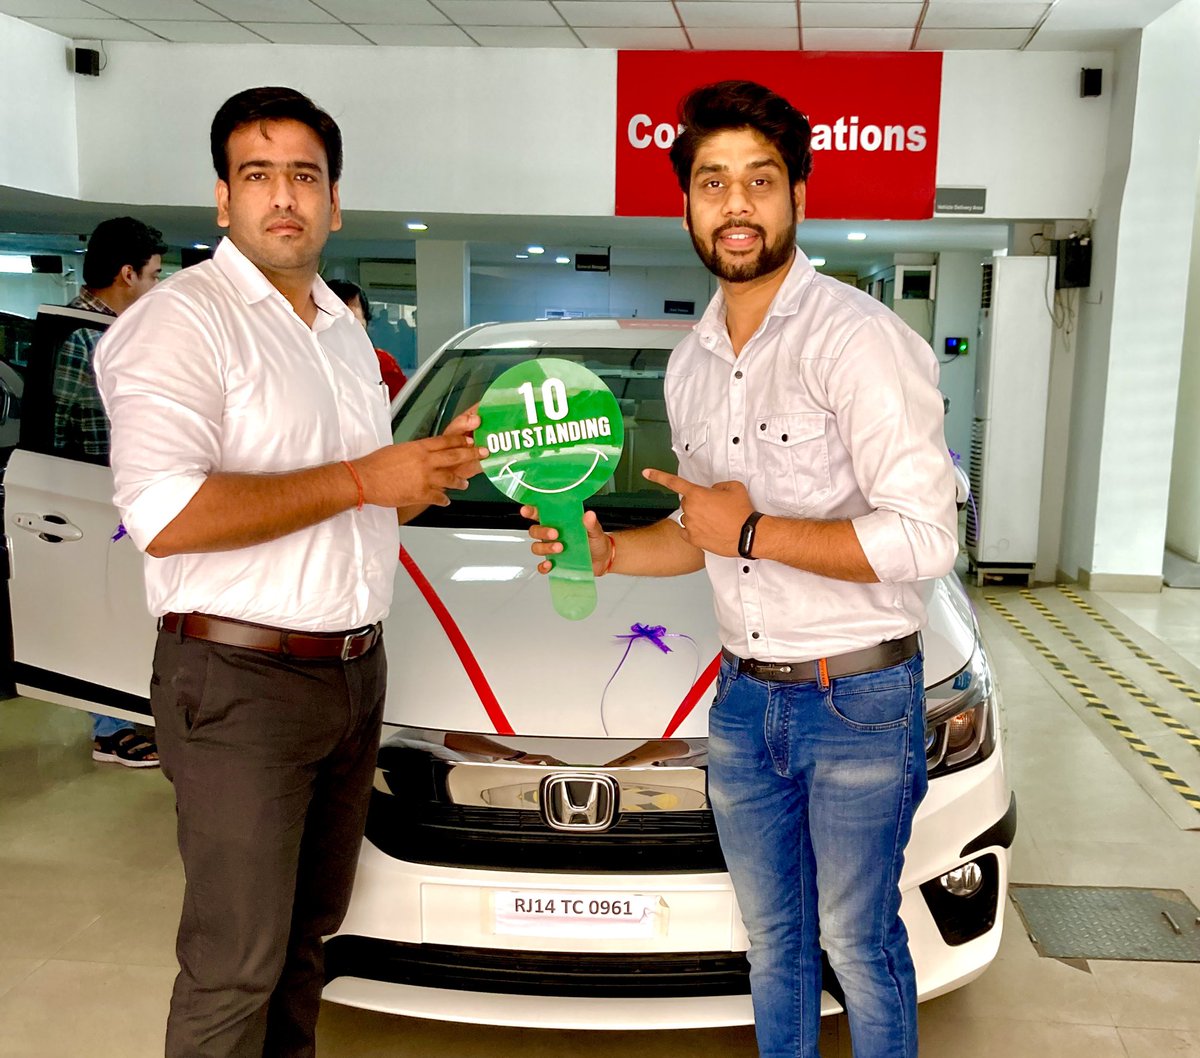 I booked #Hyundai Verna a month ago & it was due to be deliver this month but after seeing #HyundaiPakistan post, supporting separatism in #Kashmir,India, cancelled the Verna & called the Honda outlet and taken the delivery of Honda City today itself.

 #BoycottHyundai, thats it!